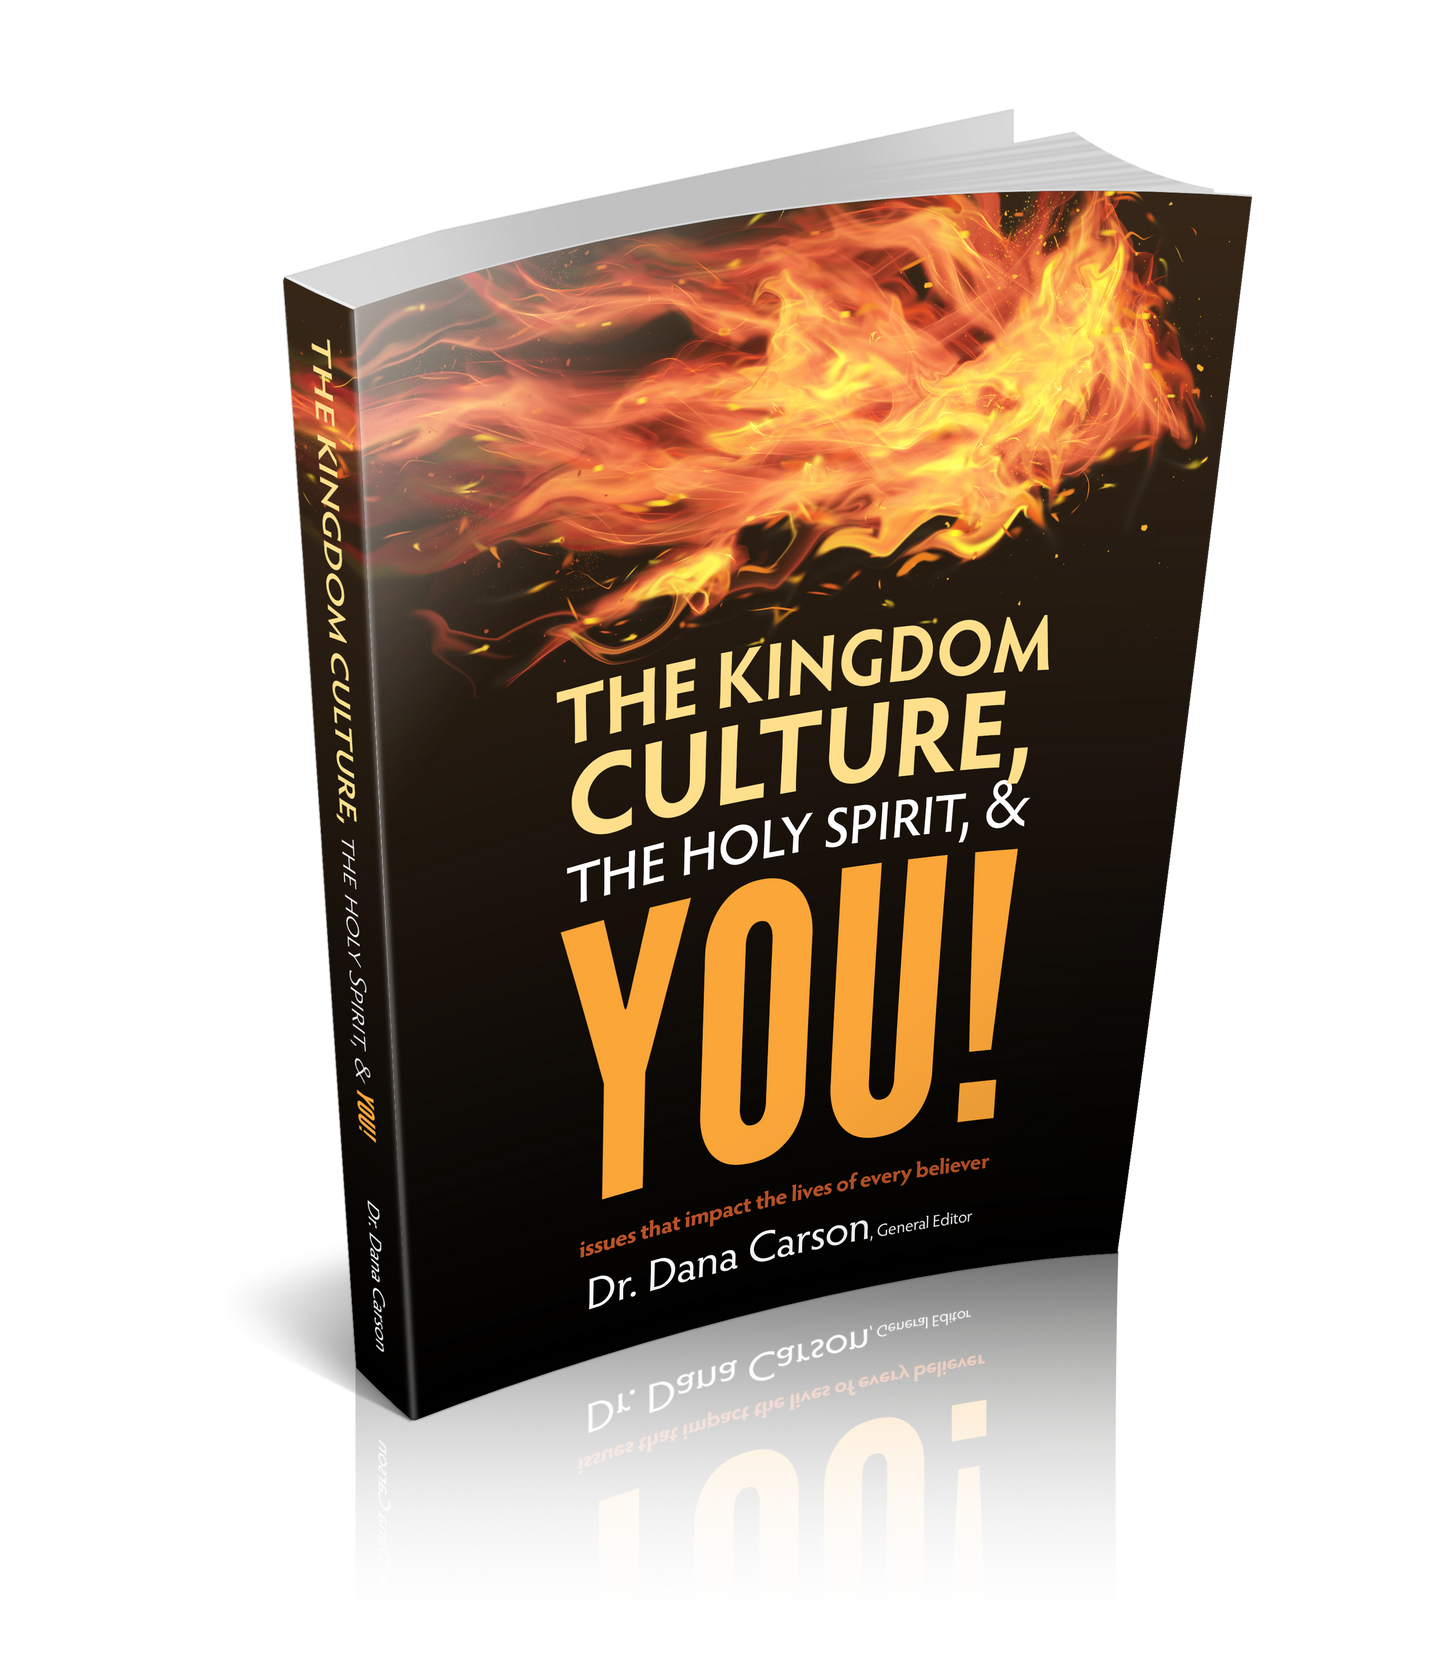 The Kingdom Culture, the Holy Spirit & YOU!